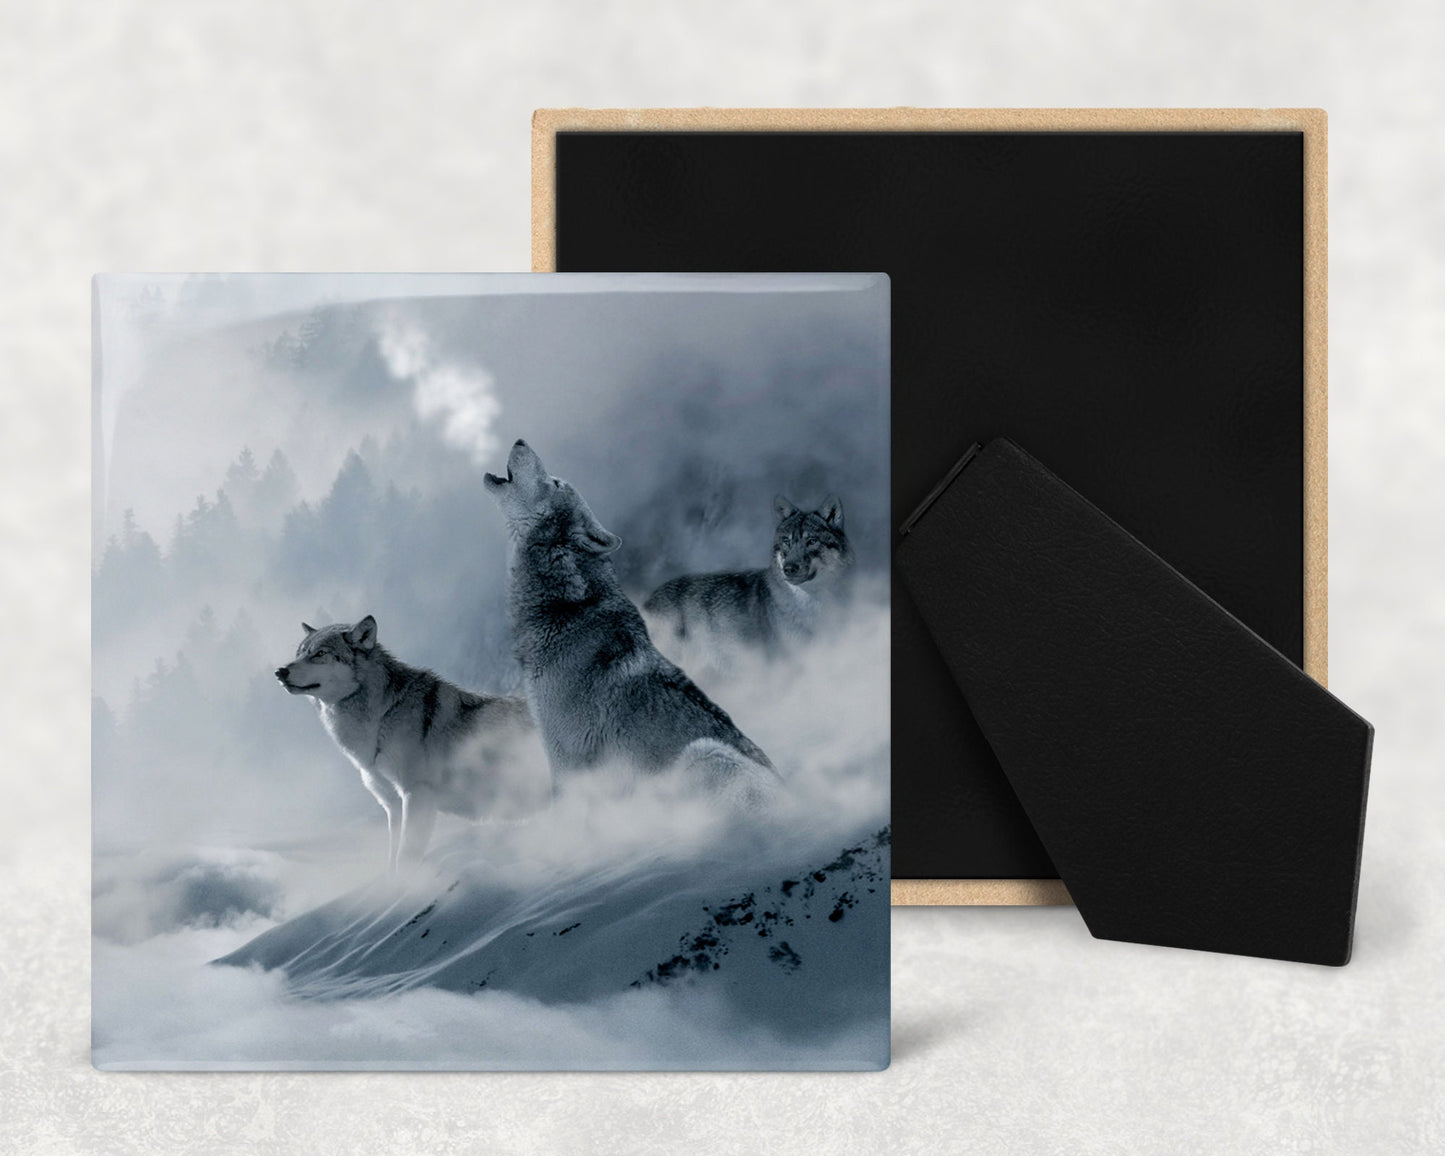 Winter Wolves Art Decorative Ceramic Tile with Optional Easel Back - Available in 3 Sizes